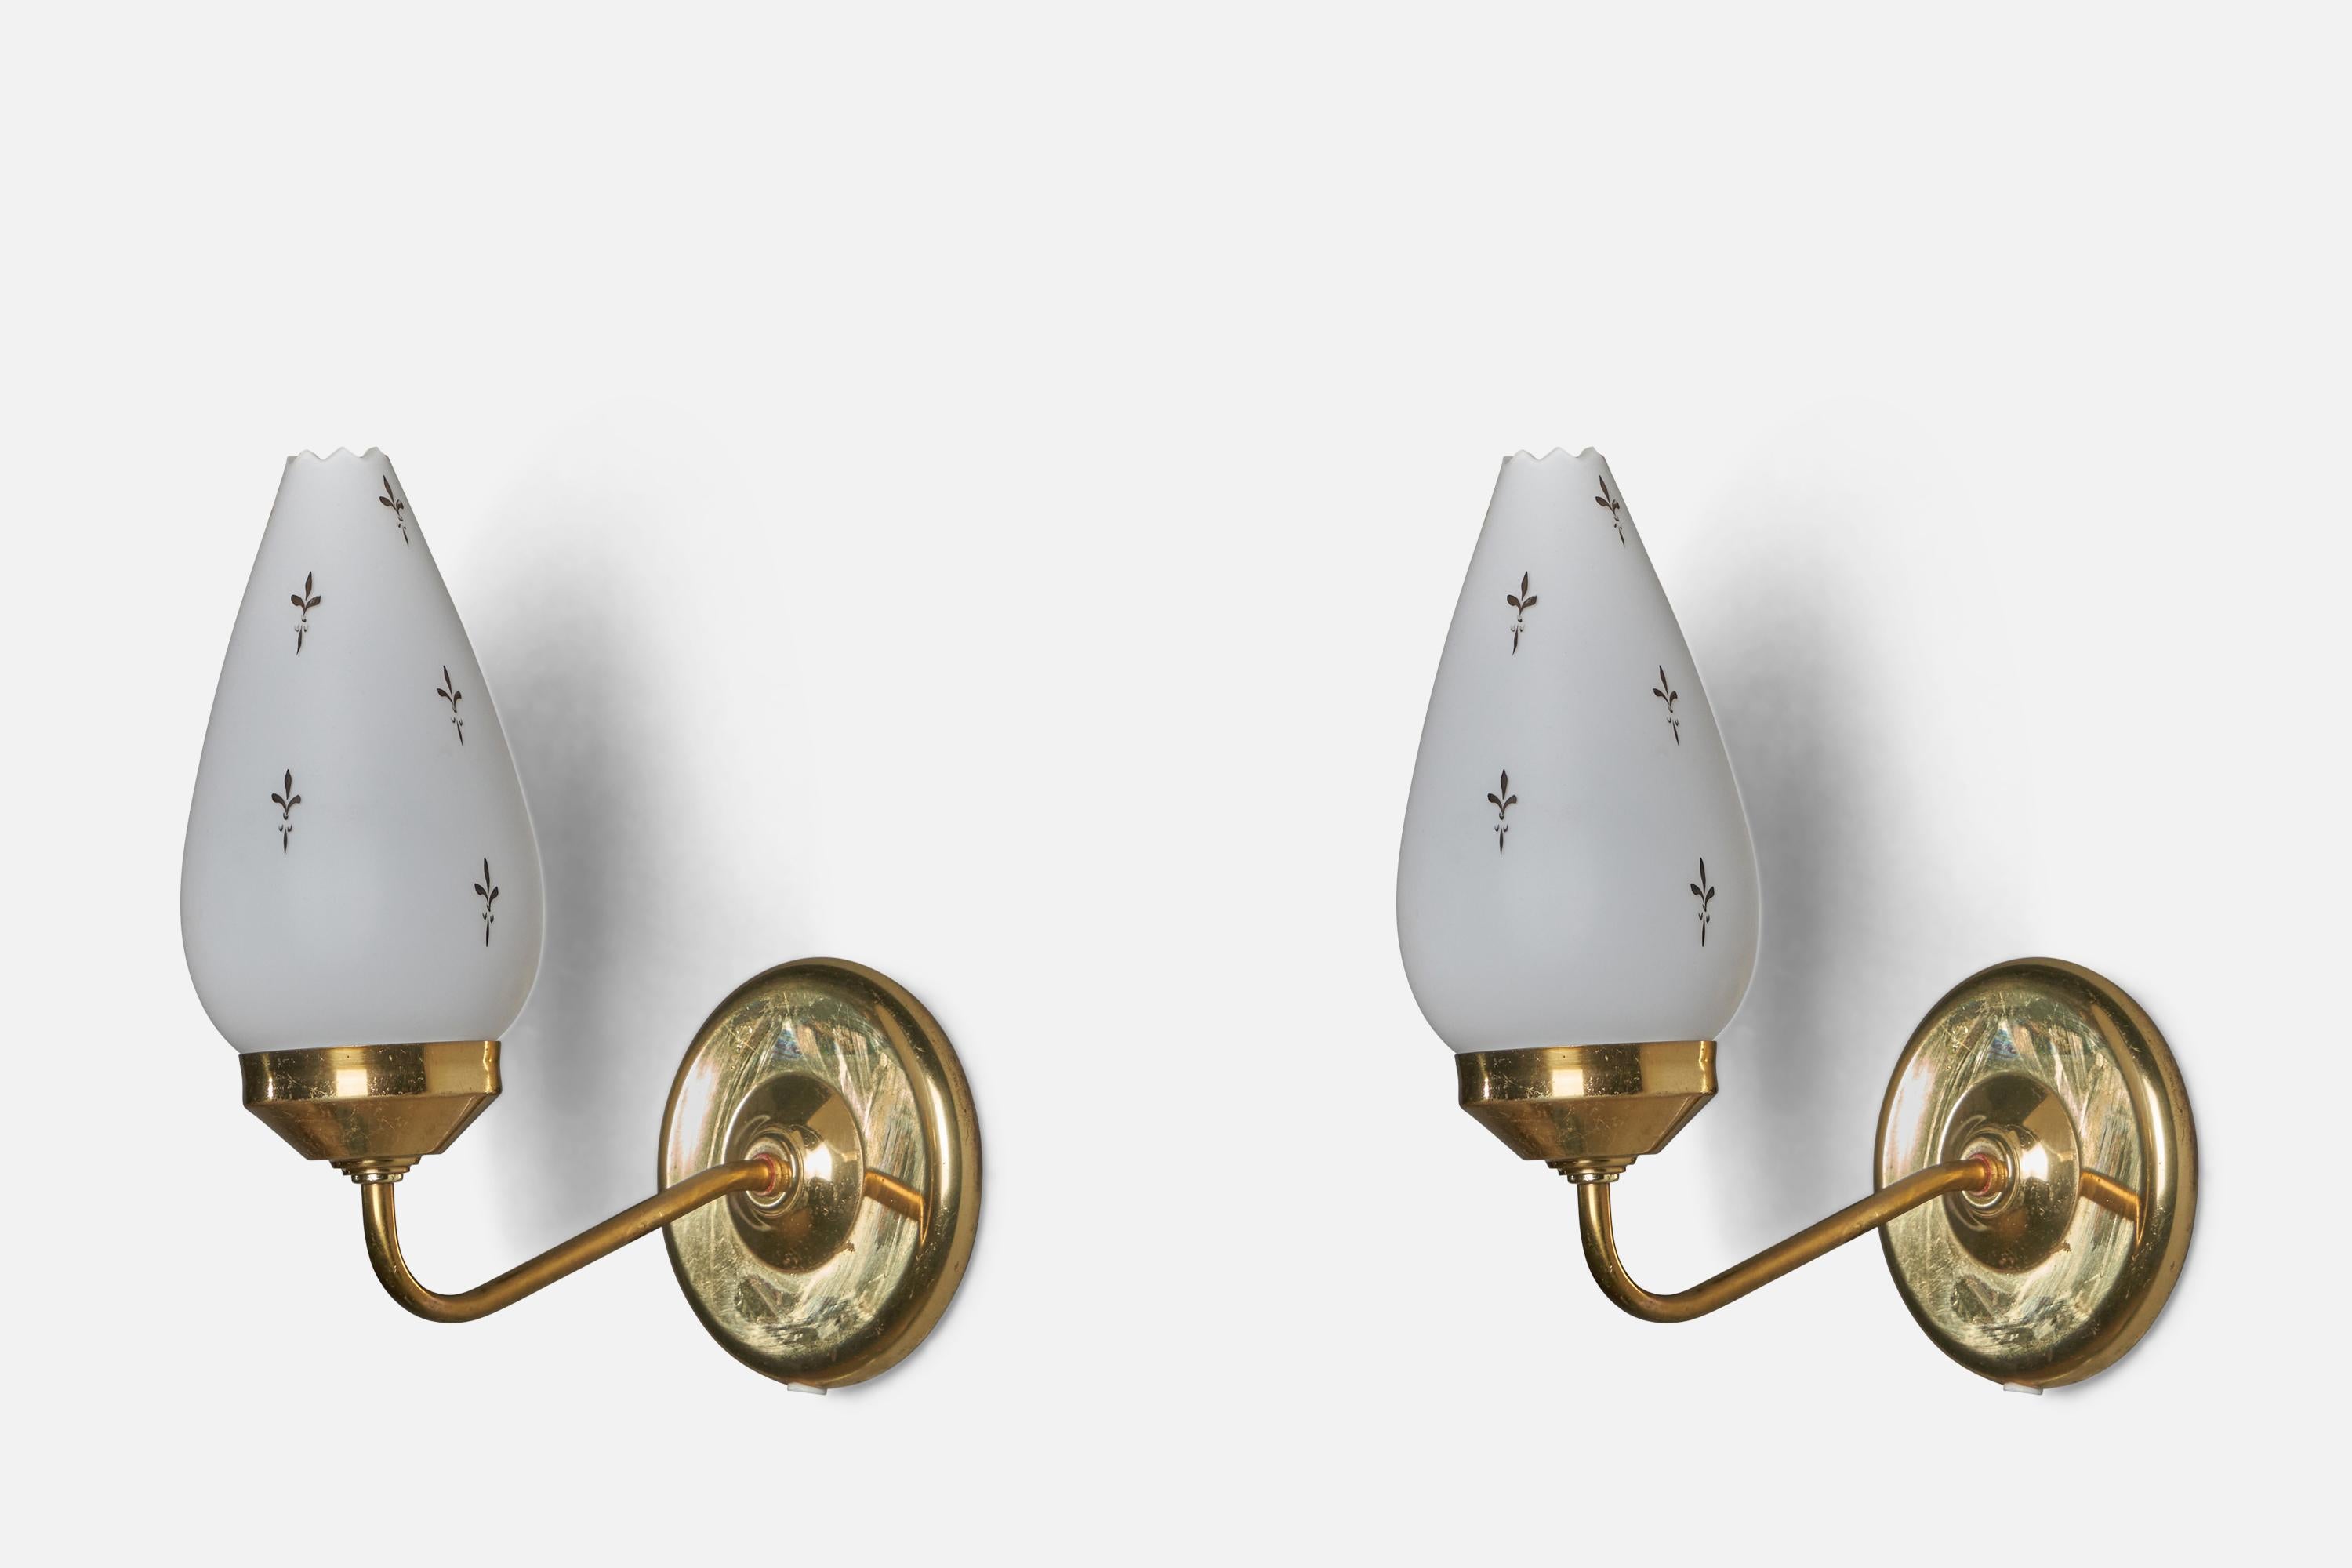 A pair of brass and opaline glass wall lights designed and produced in Sweden, 1970s.

Overall Dimensions (inches): 11.5” H x 5” W x 9” D
Back Plate Dimensions (inches): 5” Diameter x 0.75” D
Bulb Specifications: E-26 Bulb
Number of Sockets: 1